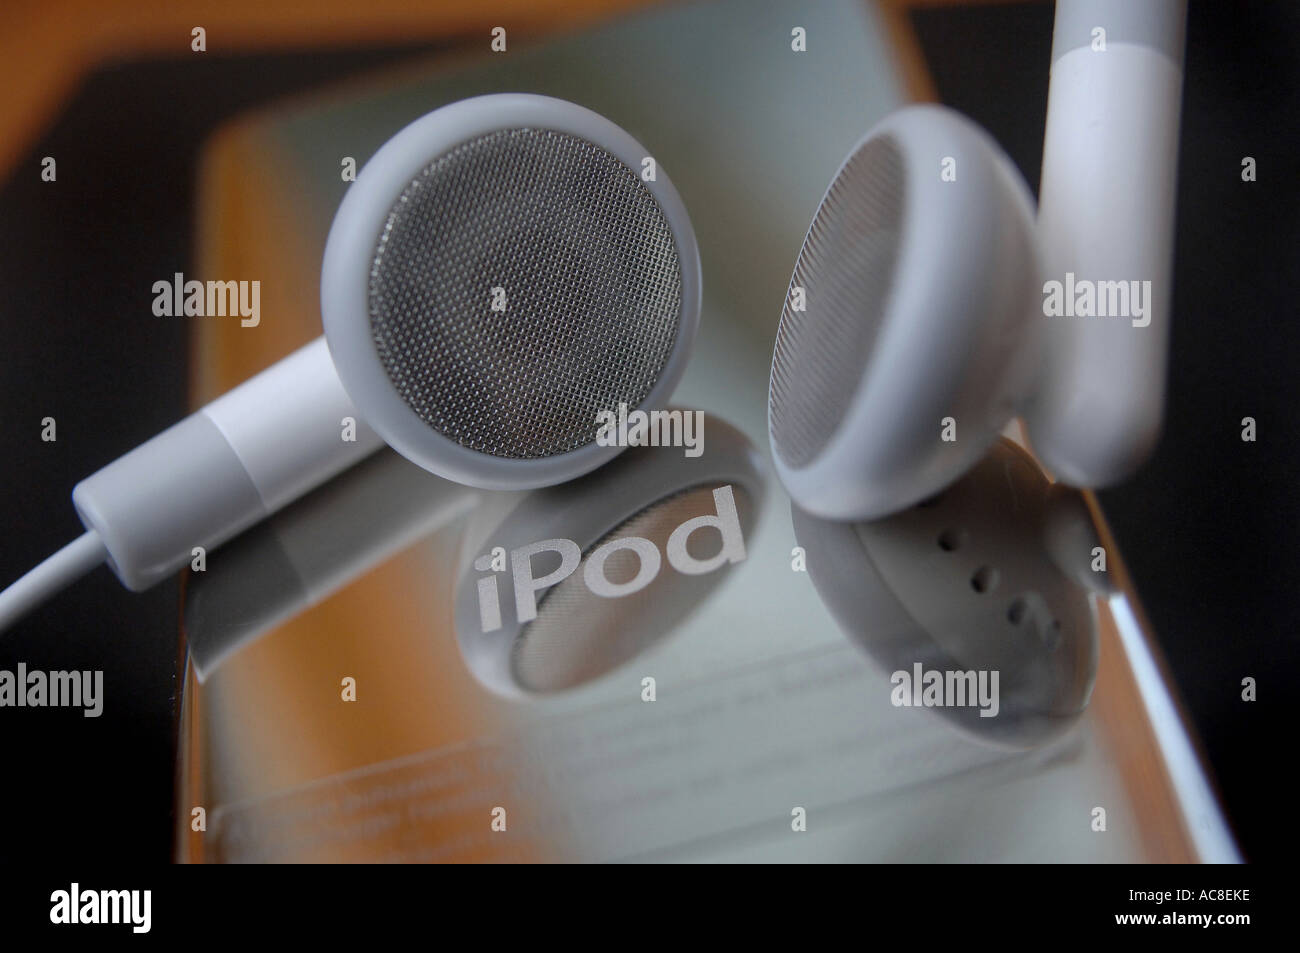 The back of an apple iPod nano showing the apple logo, with the headphones Stock Photo